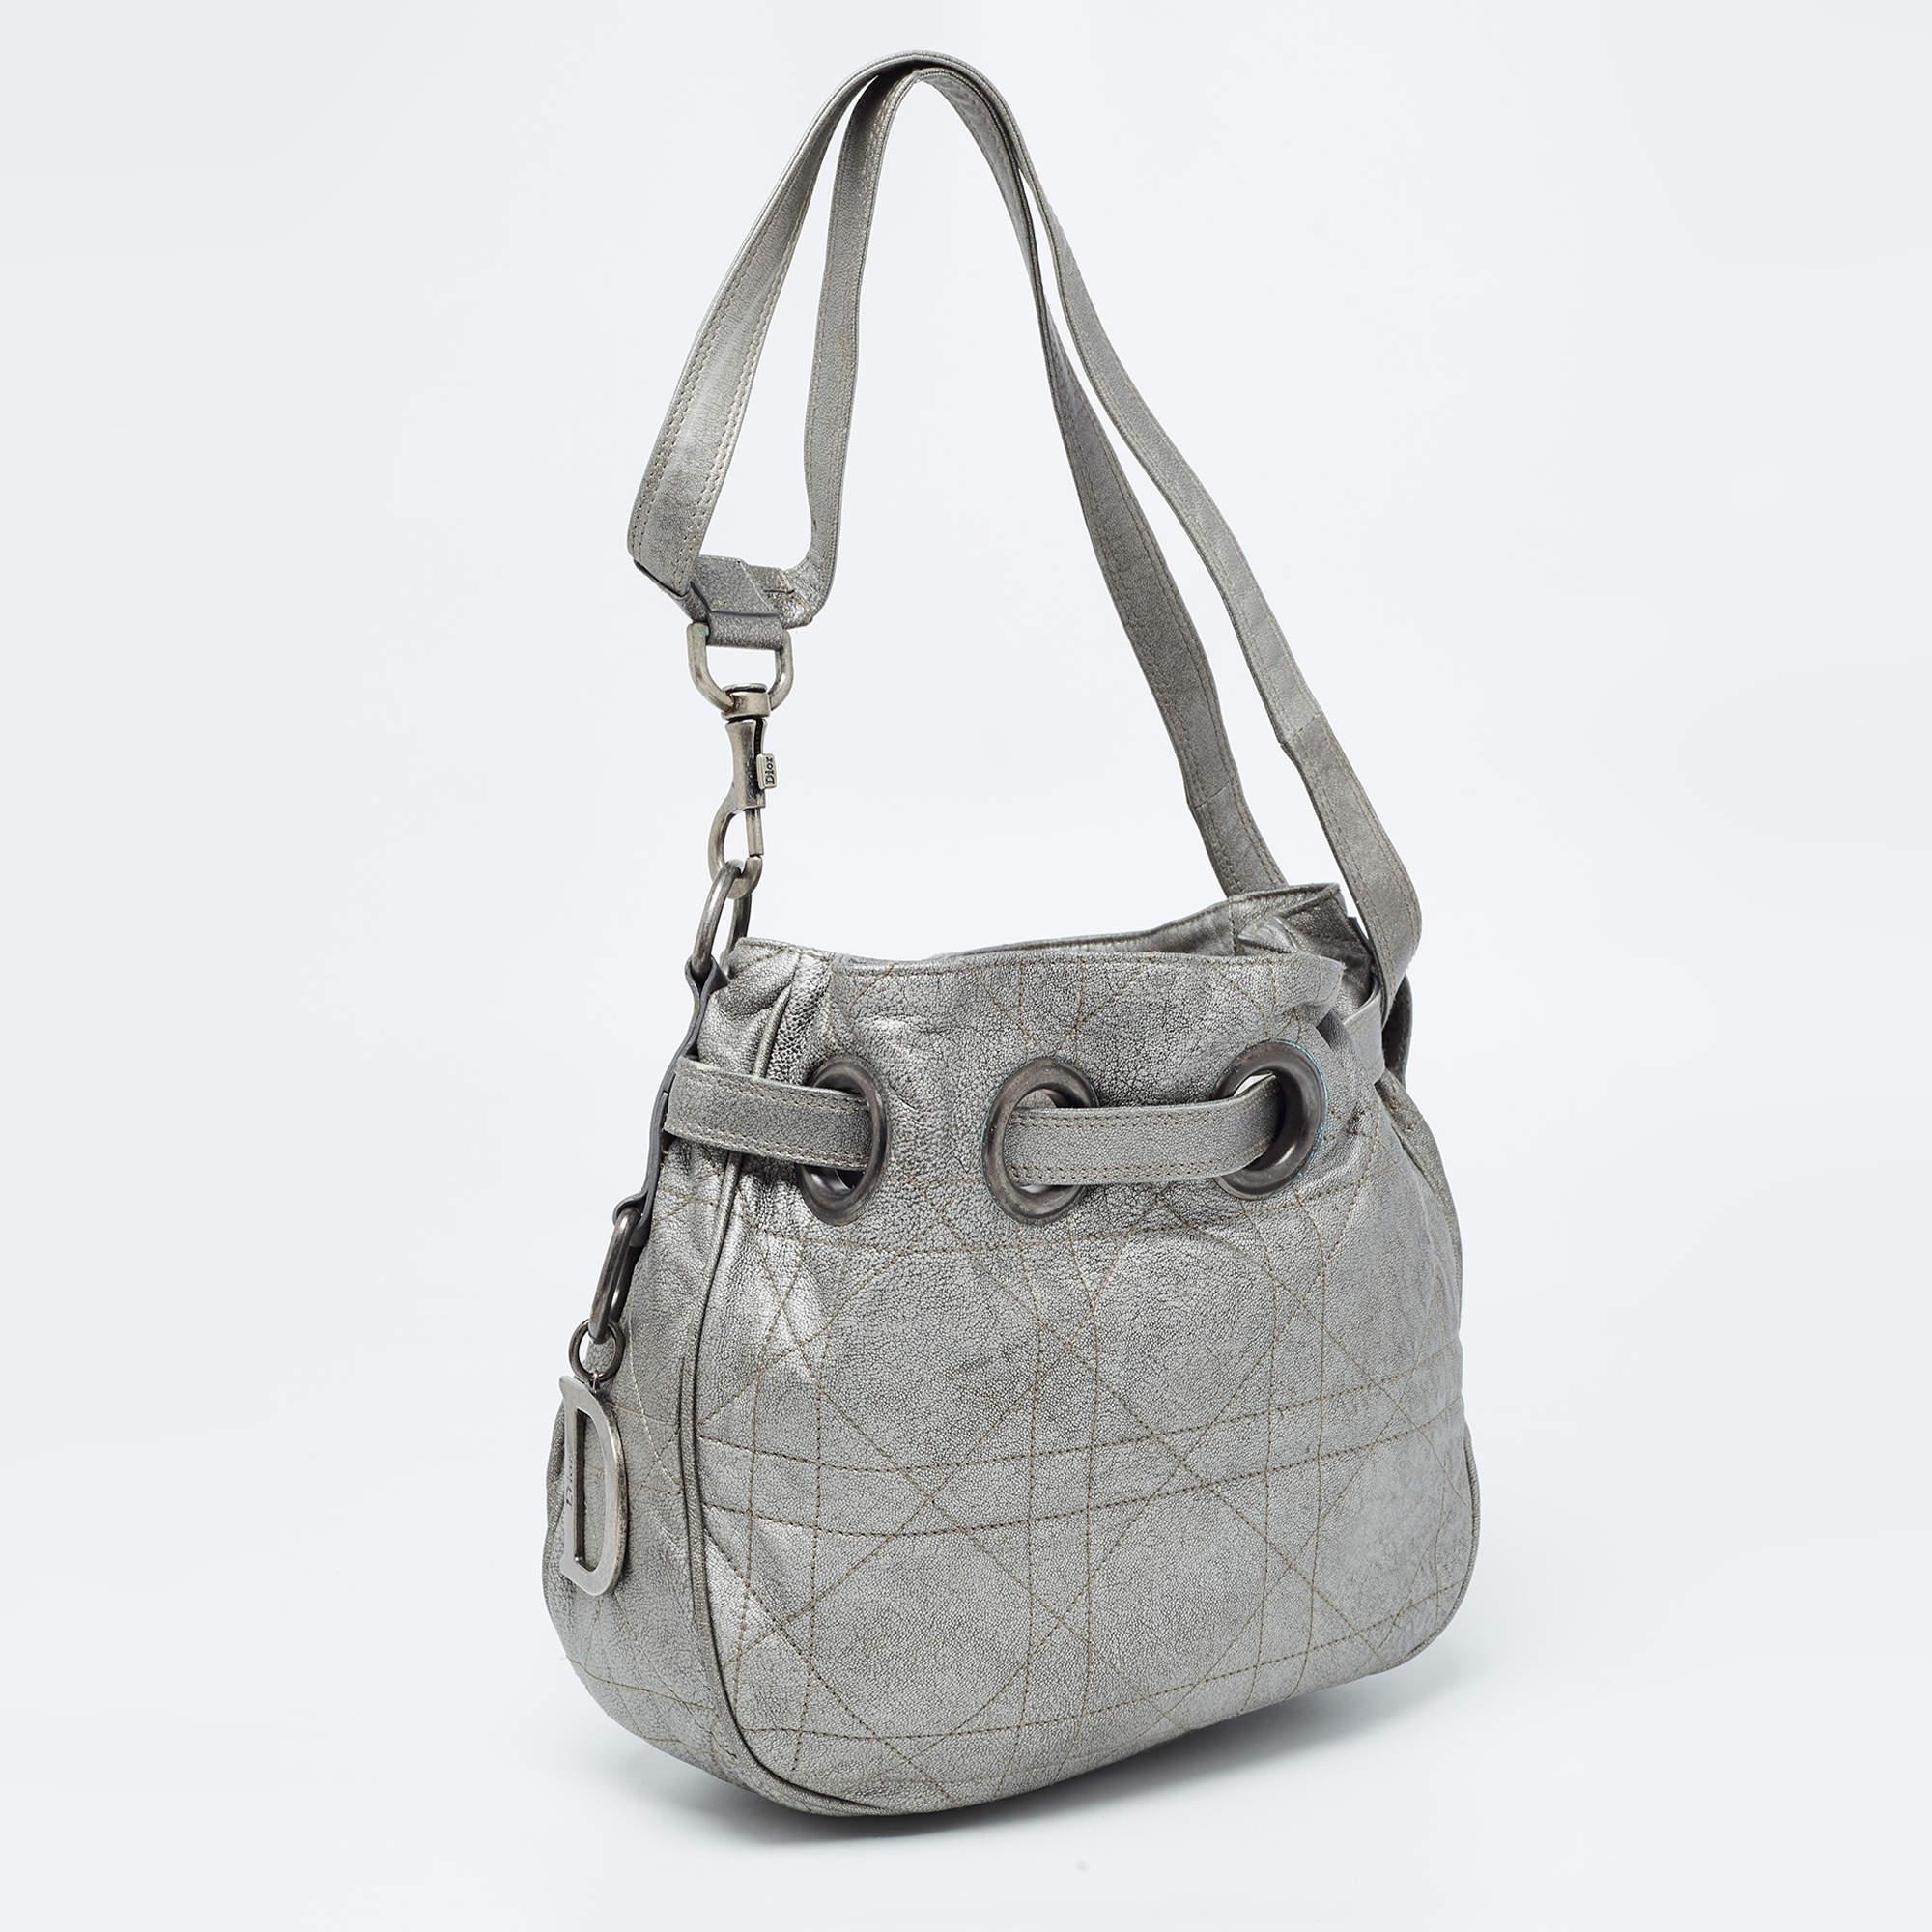 A classic handbag comes with the promise of enduring appeal, boosting your style time and again. This Dior grey bag is one such creation. It’s a fine purchase.

